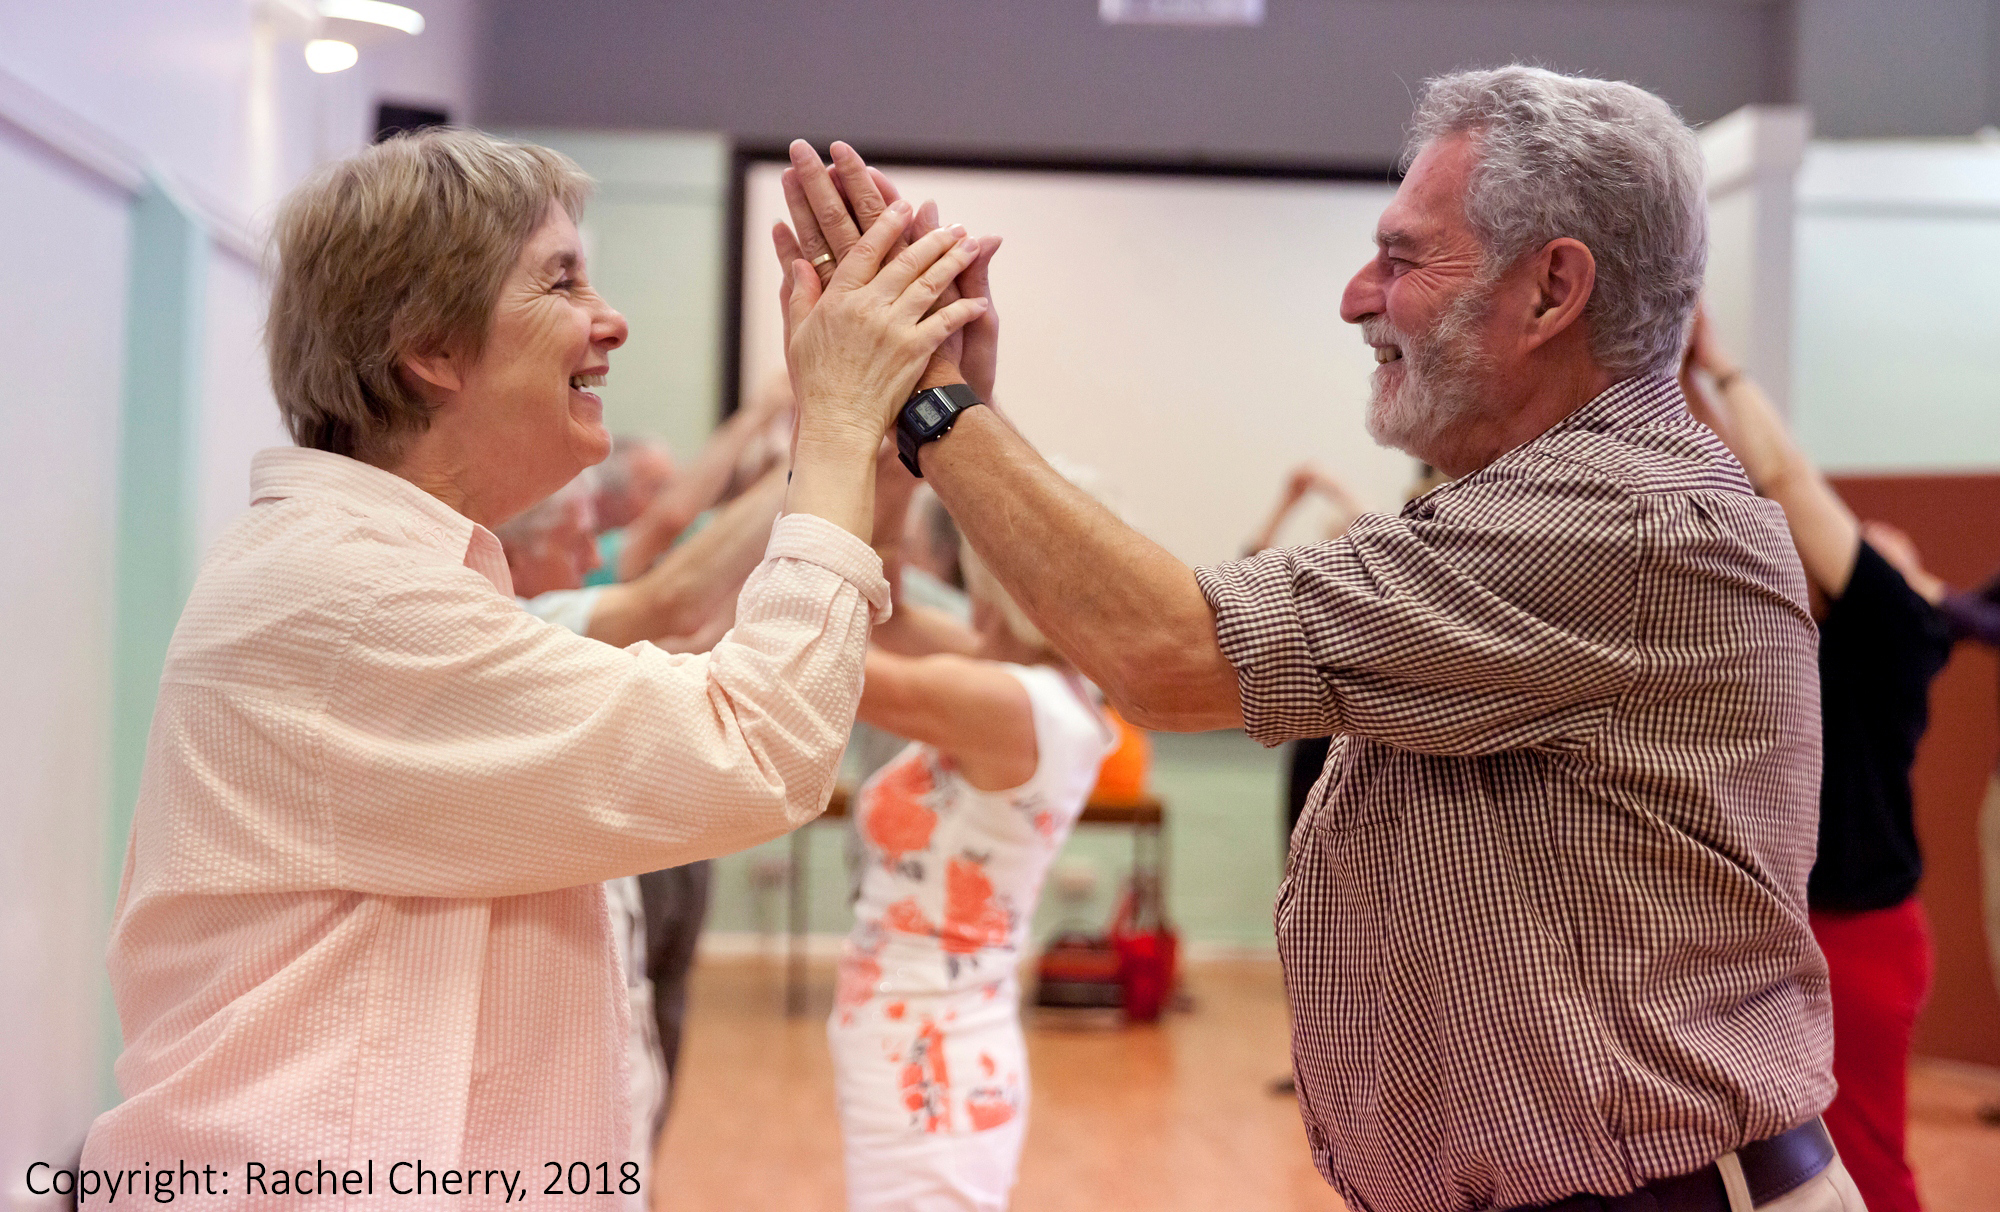 Image - Dr Sara Houston publishes new book, Dancing with Parkinson's